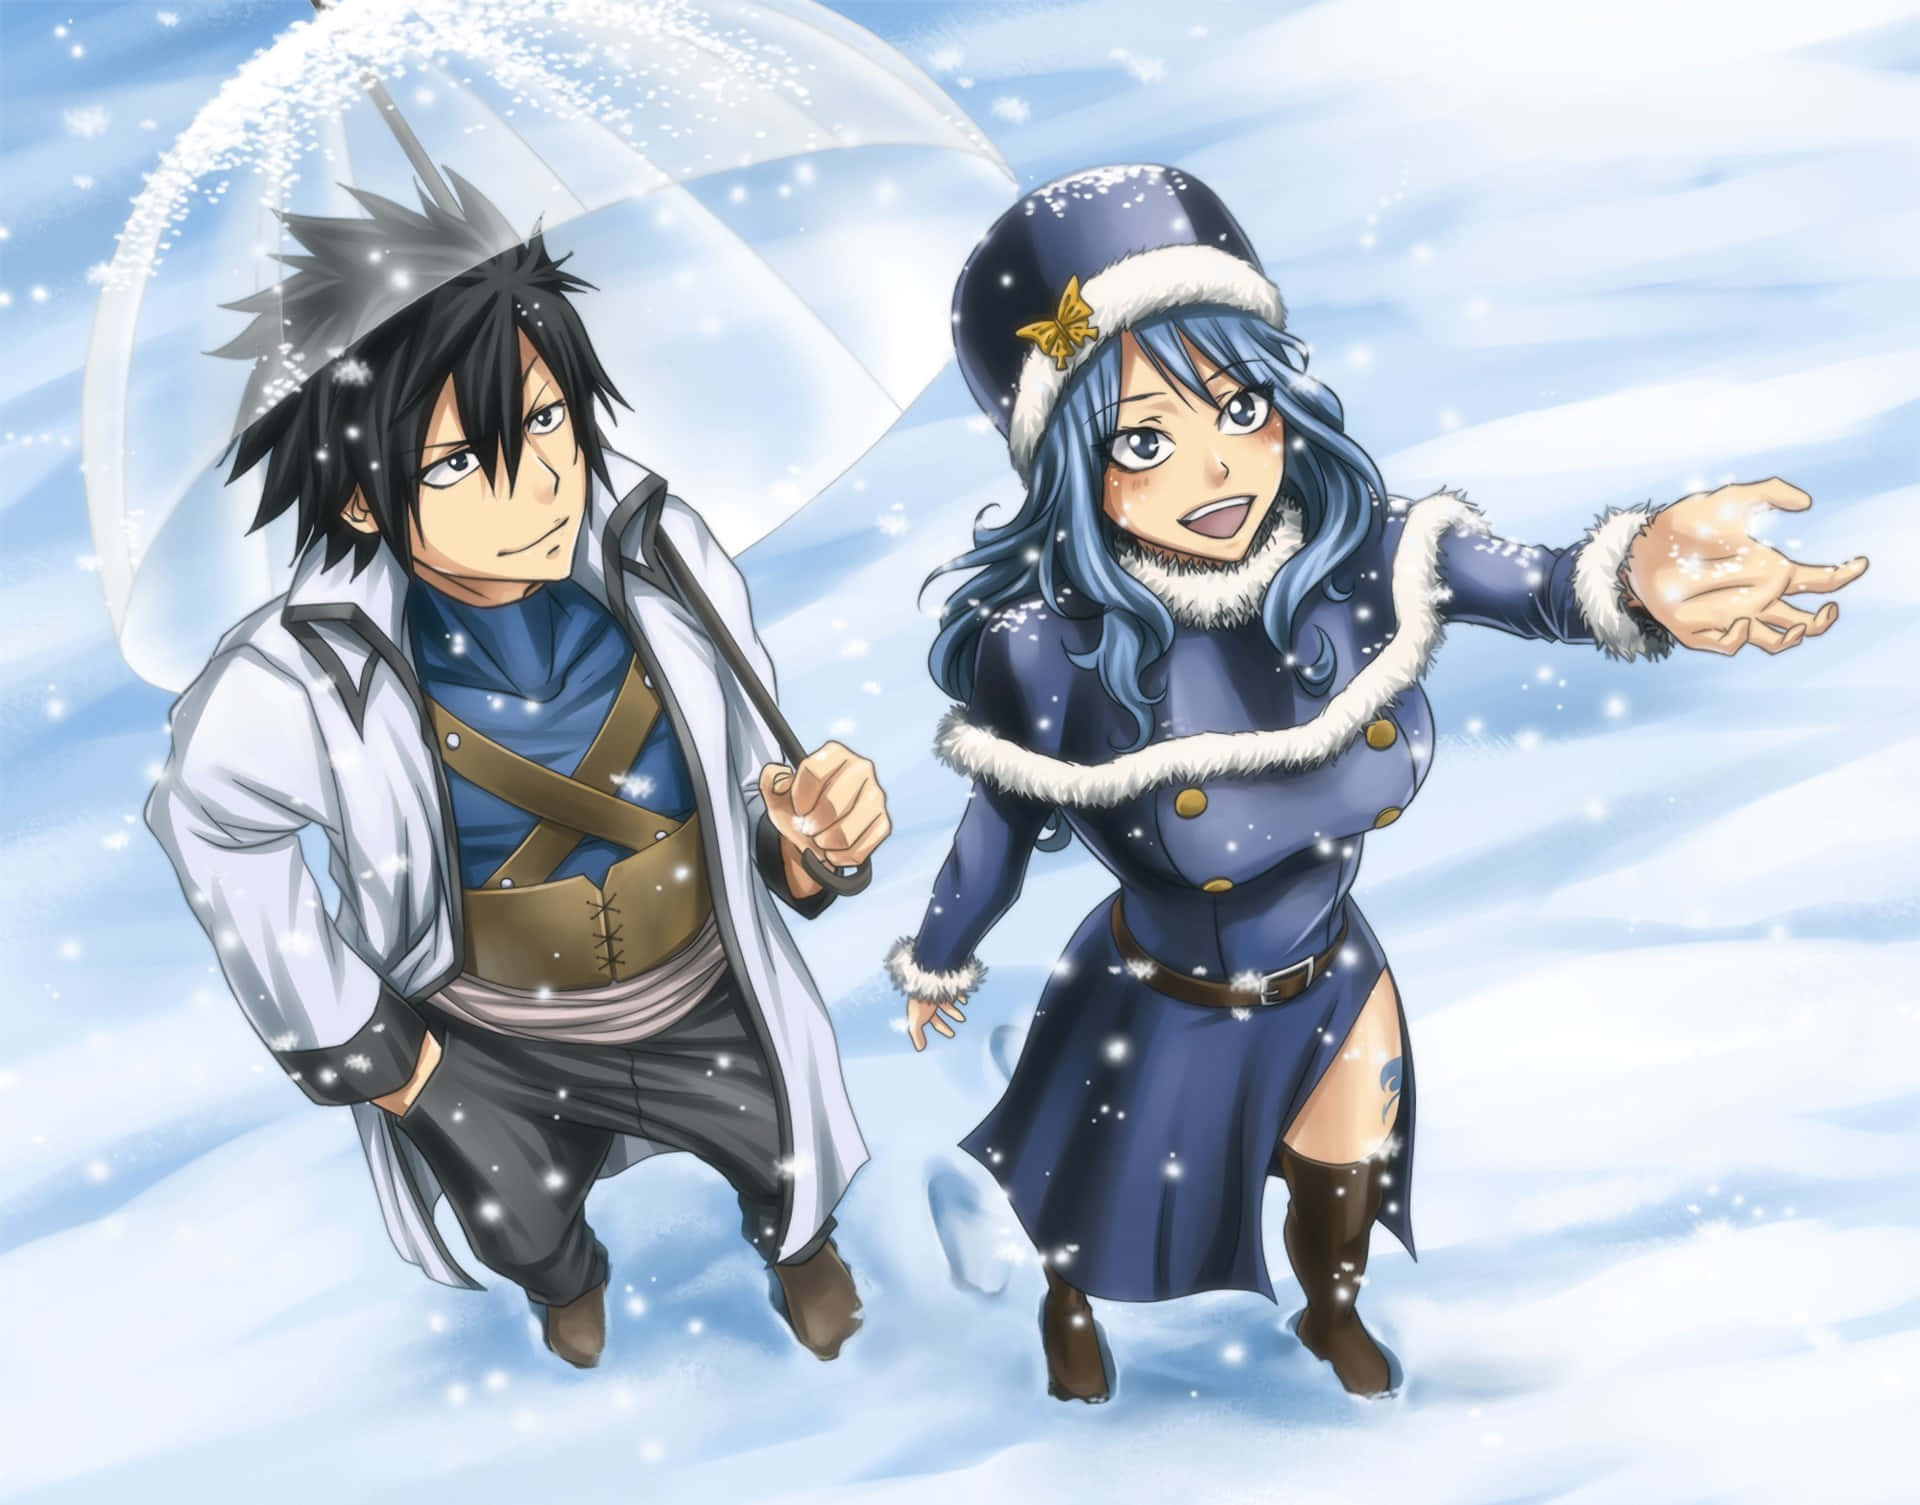 Juvia Lockser unleashes her powerful water magic in a dynamic pose Wallpaper